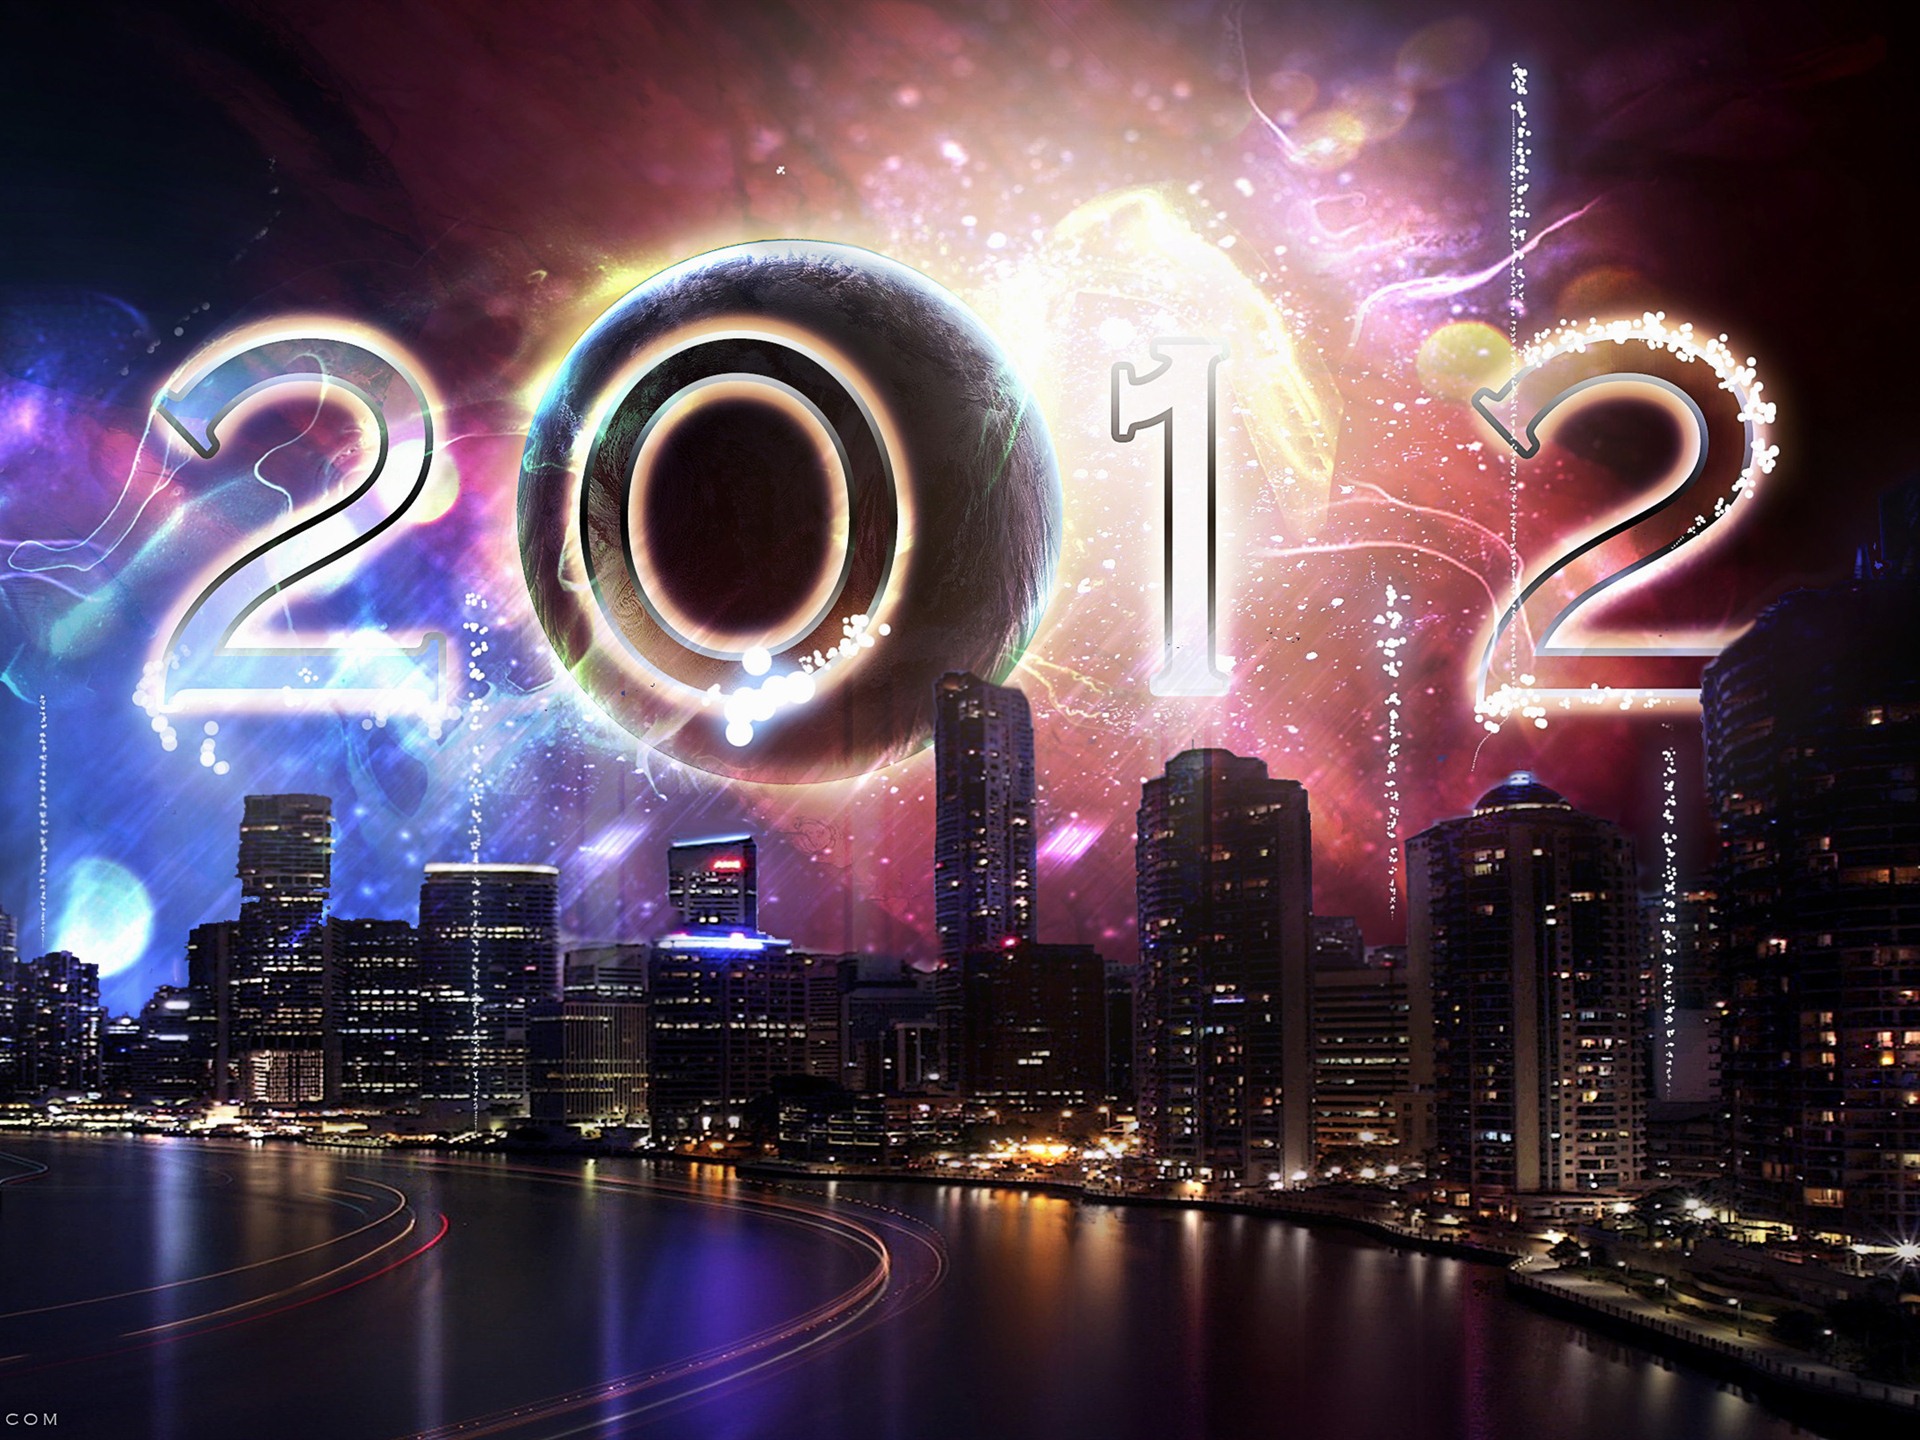 2012 New Year wallpapers (1) #1 - 1920x1440